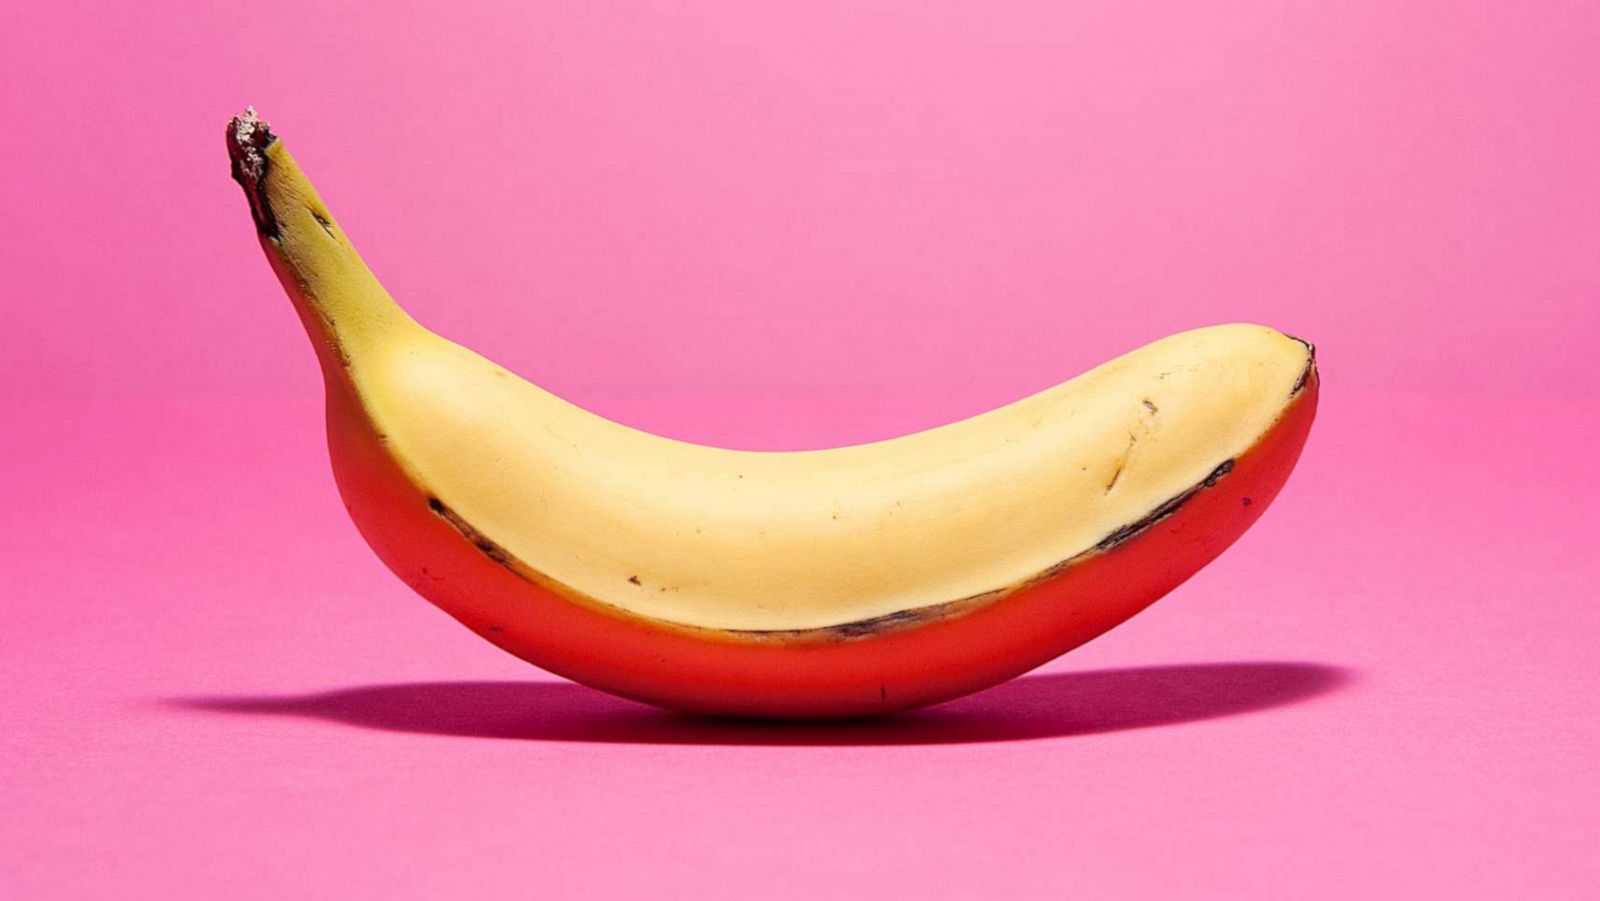 Banana-infused beauty products have incredible benefits, according to  experts - Good Morning America